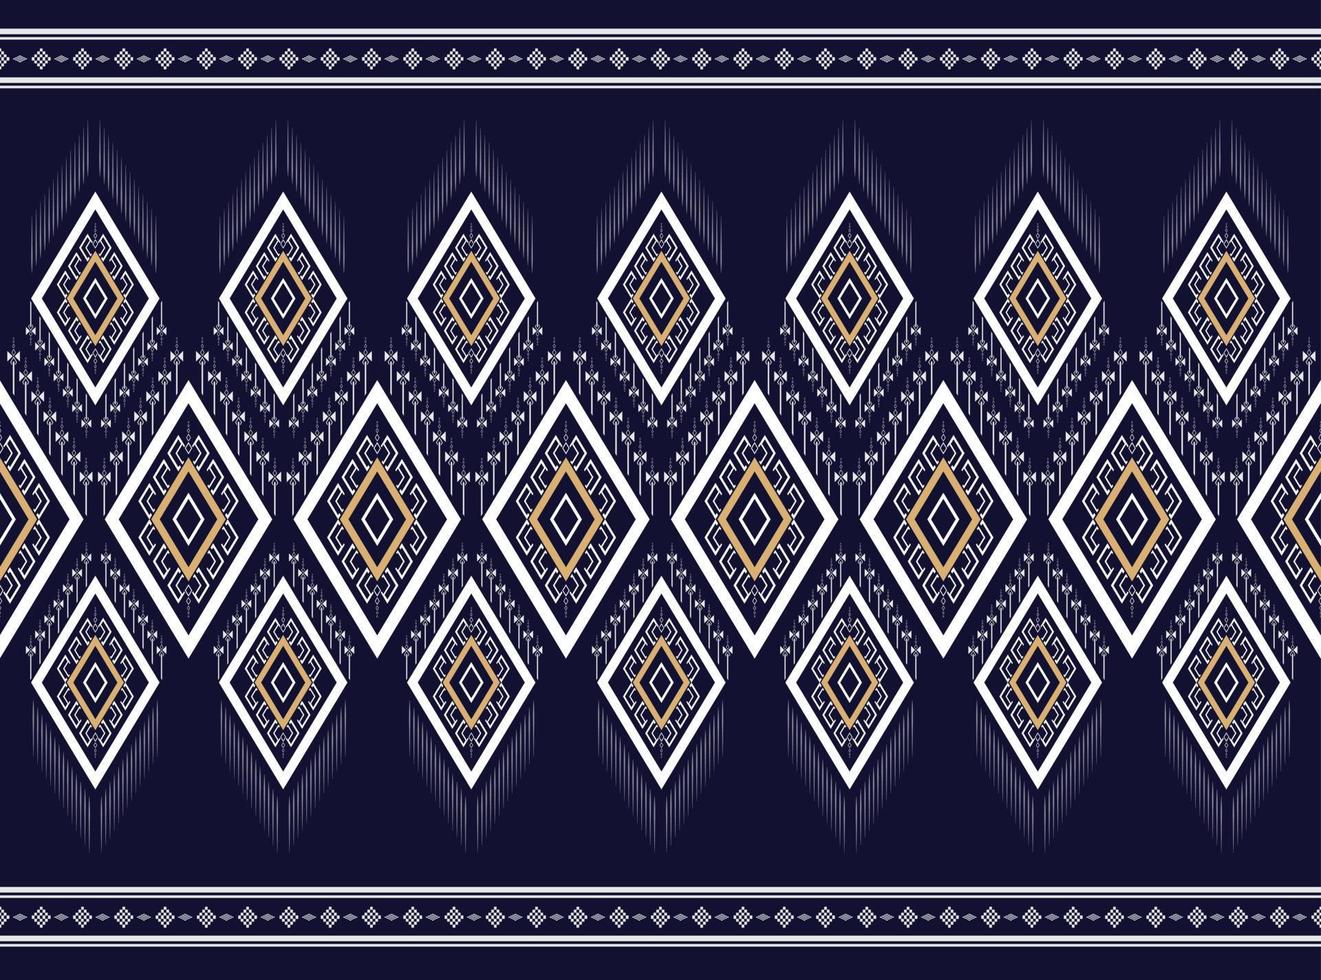 Black and white Geometric ethnic pattern traditional Texture for skirt,carpet,wallpaper,clothing,wrapping,Batik,fabric,clothes, Fashion, sheet white background Vector and illustration embroidery